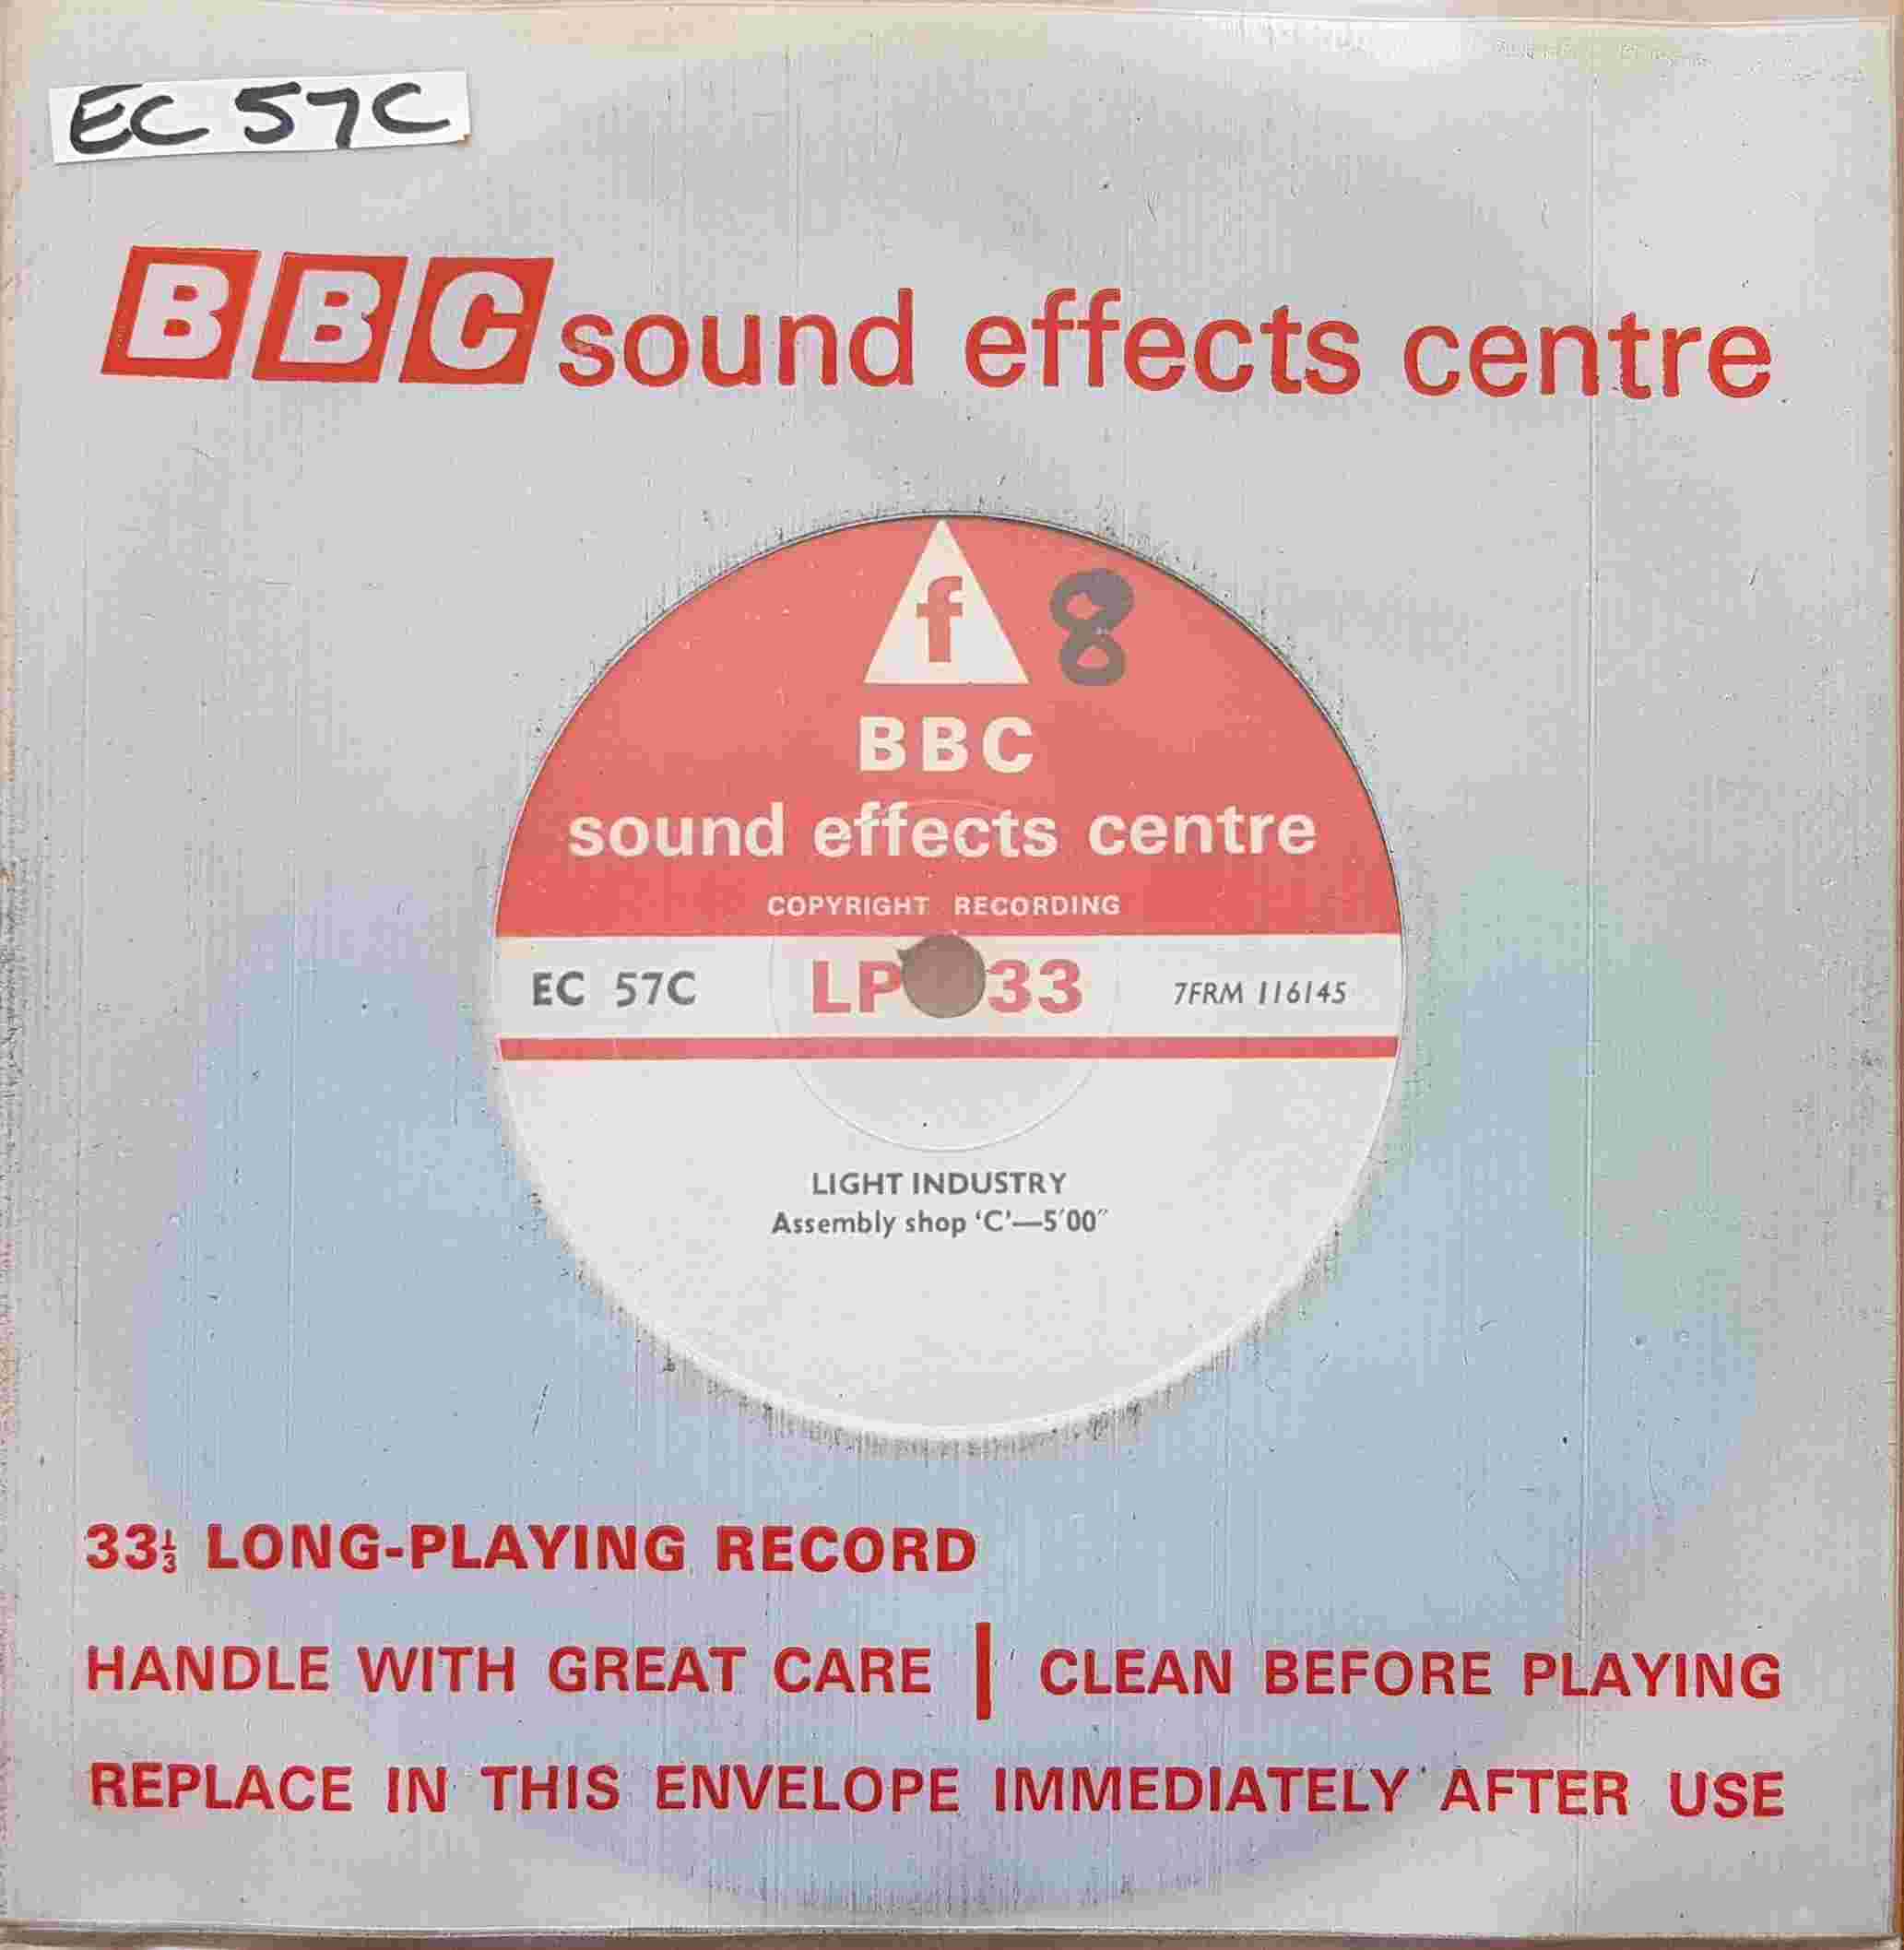 Picture of EC 57C Light industry by artist Not registered from the BBC records and Tapes library